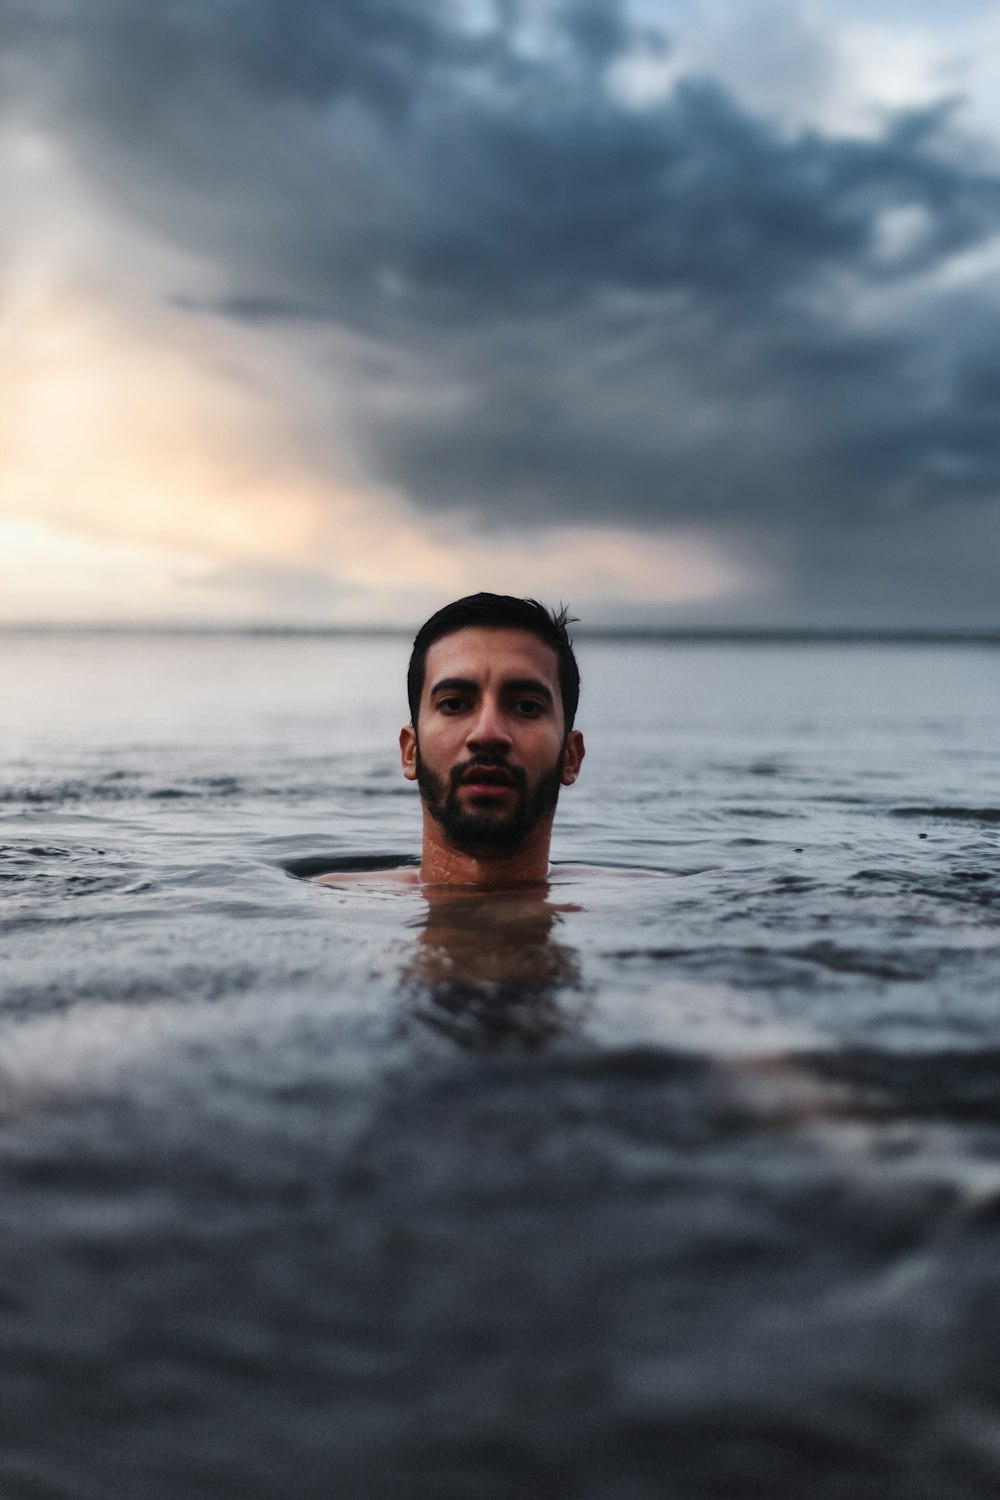 man in water under cloudy sky during daytime